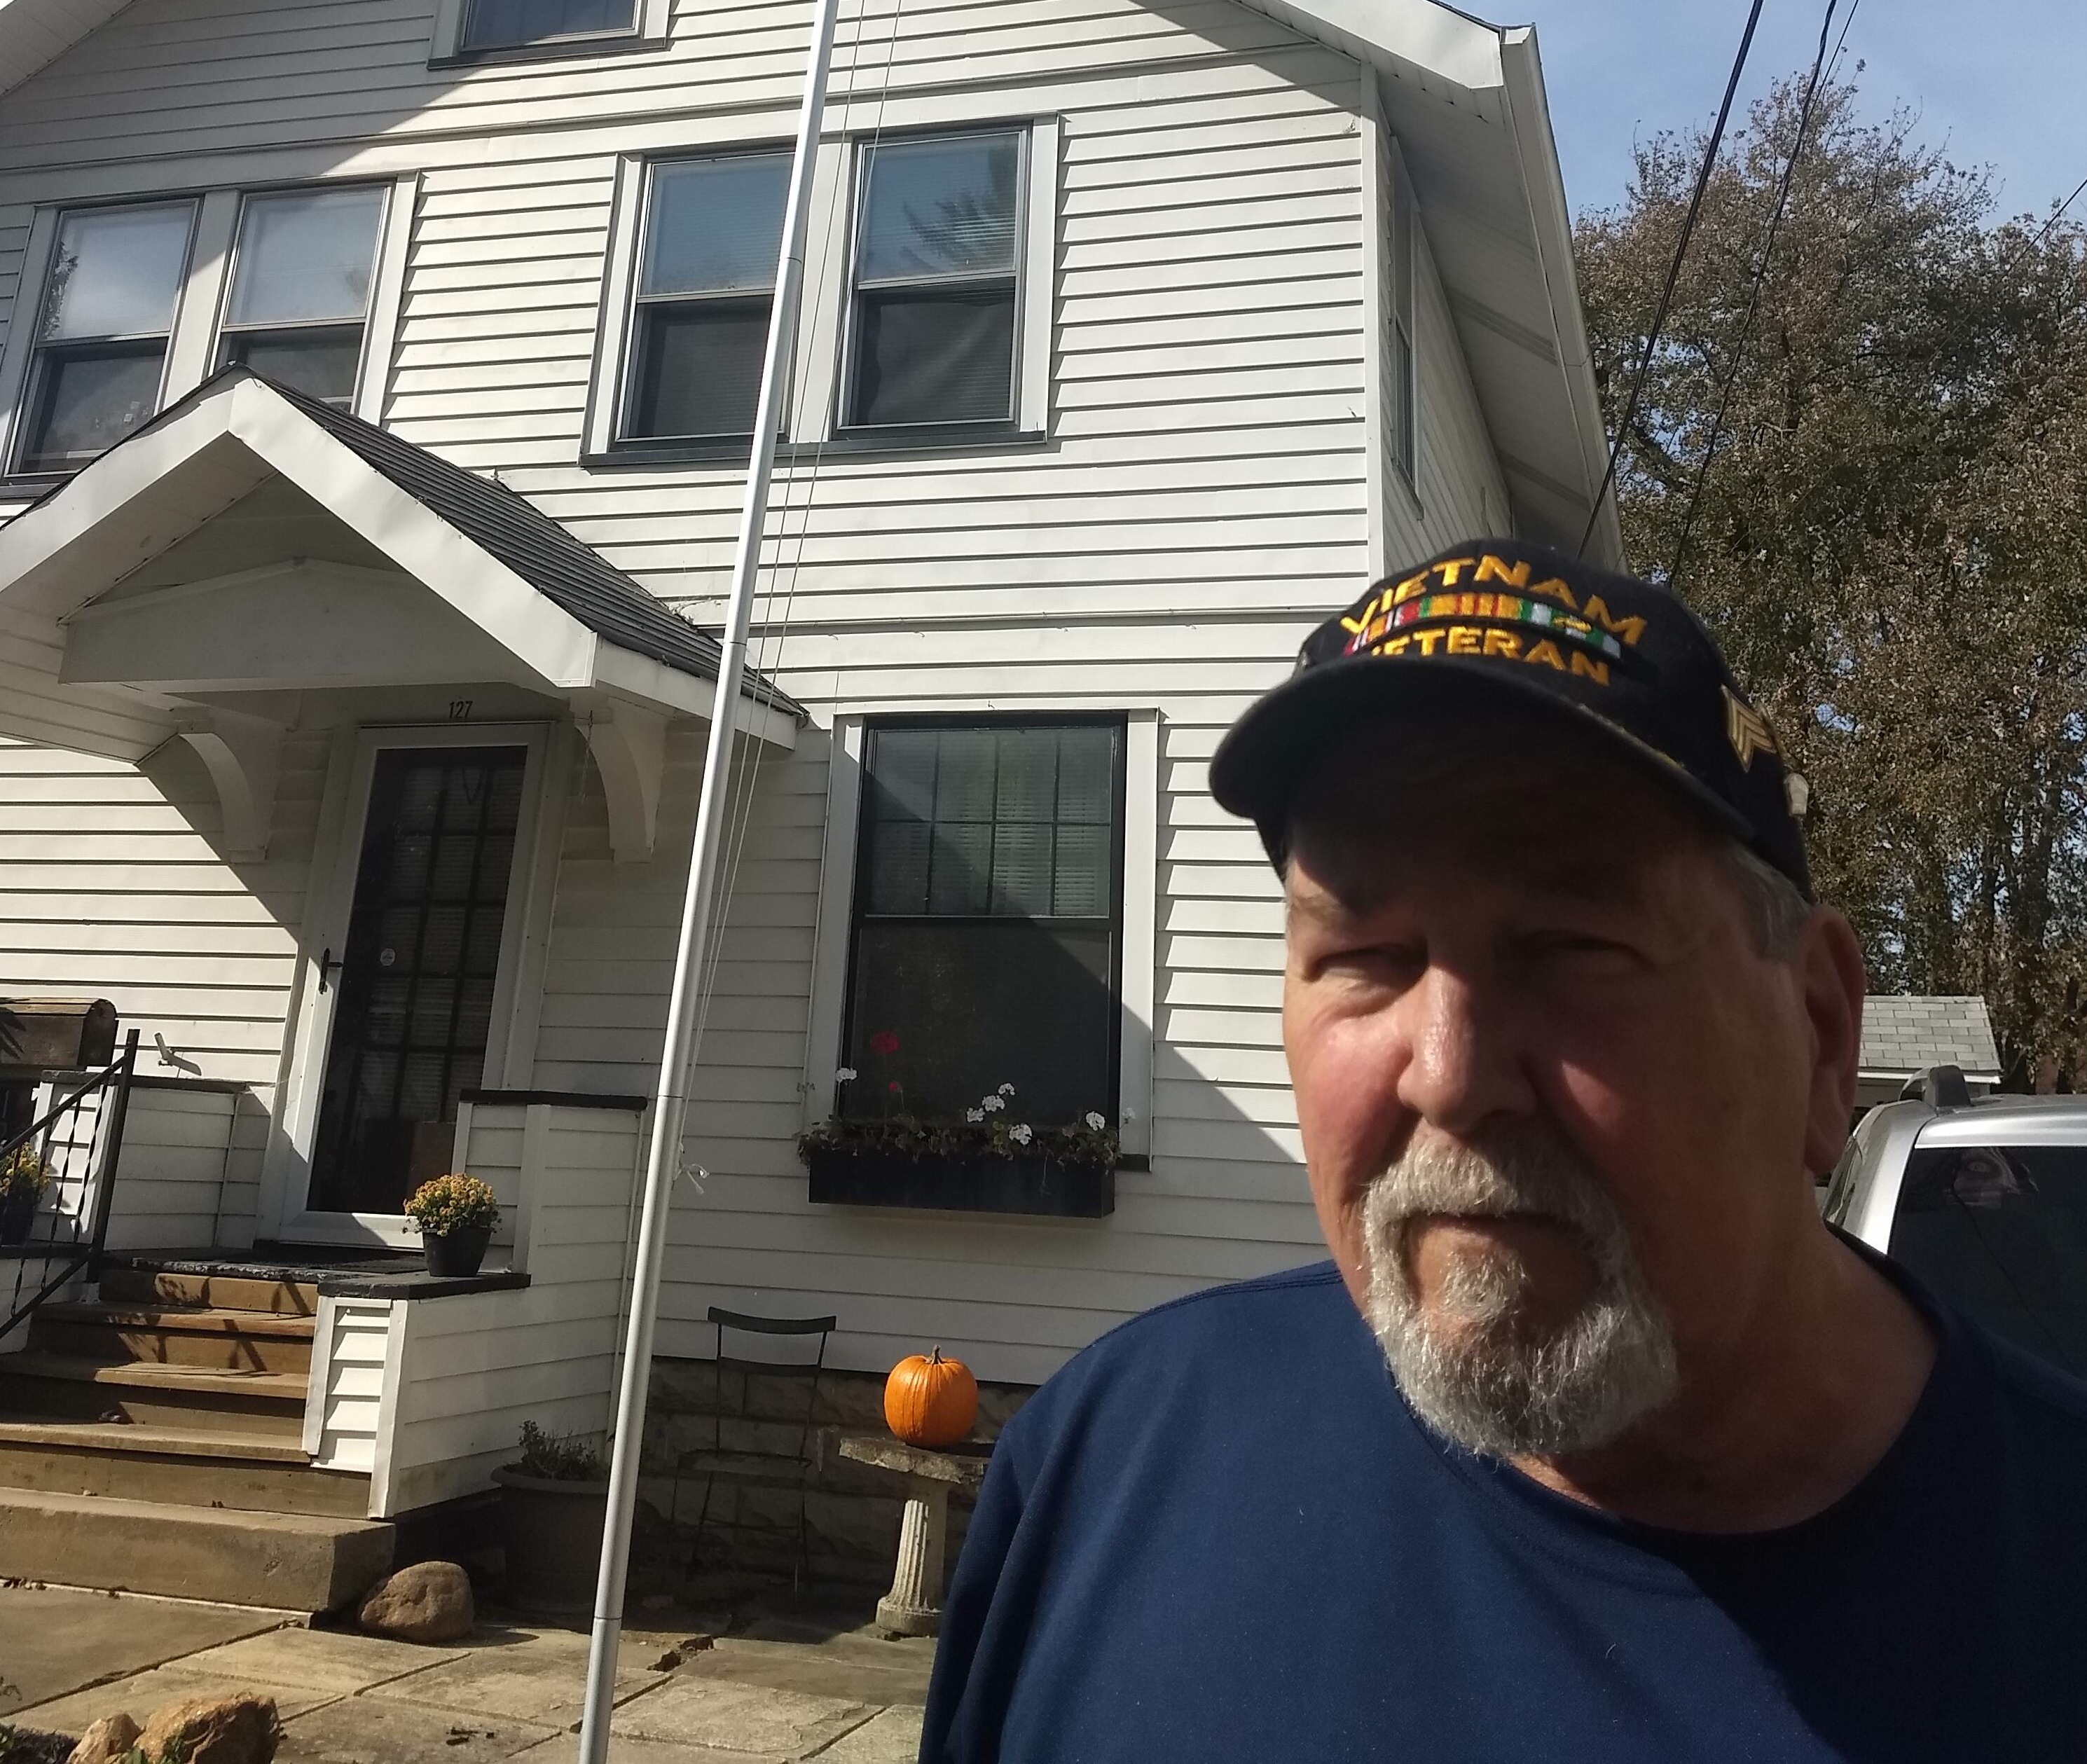 Bedford veteran shares experiences with fellow service members